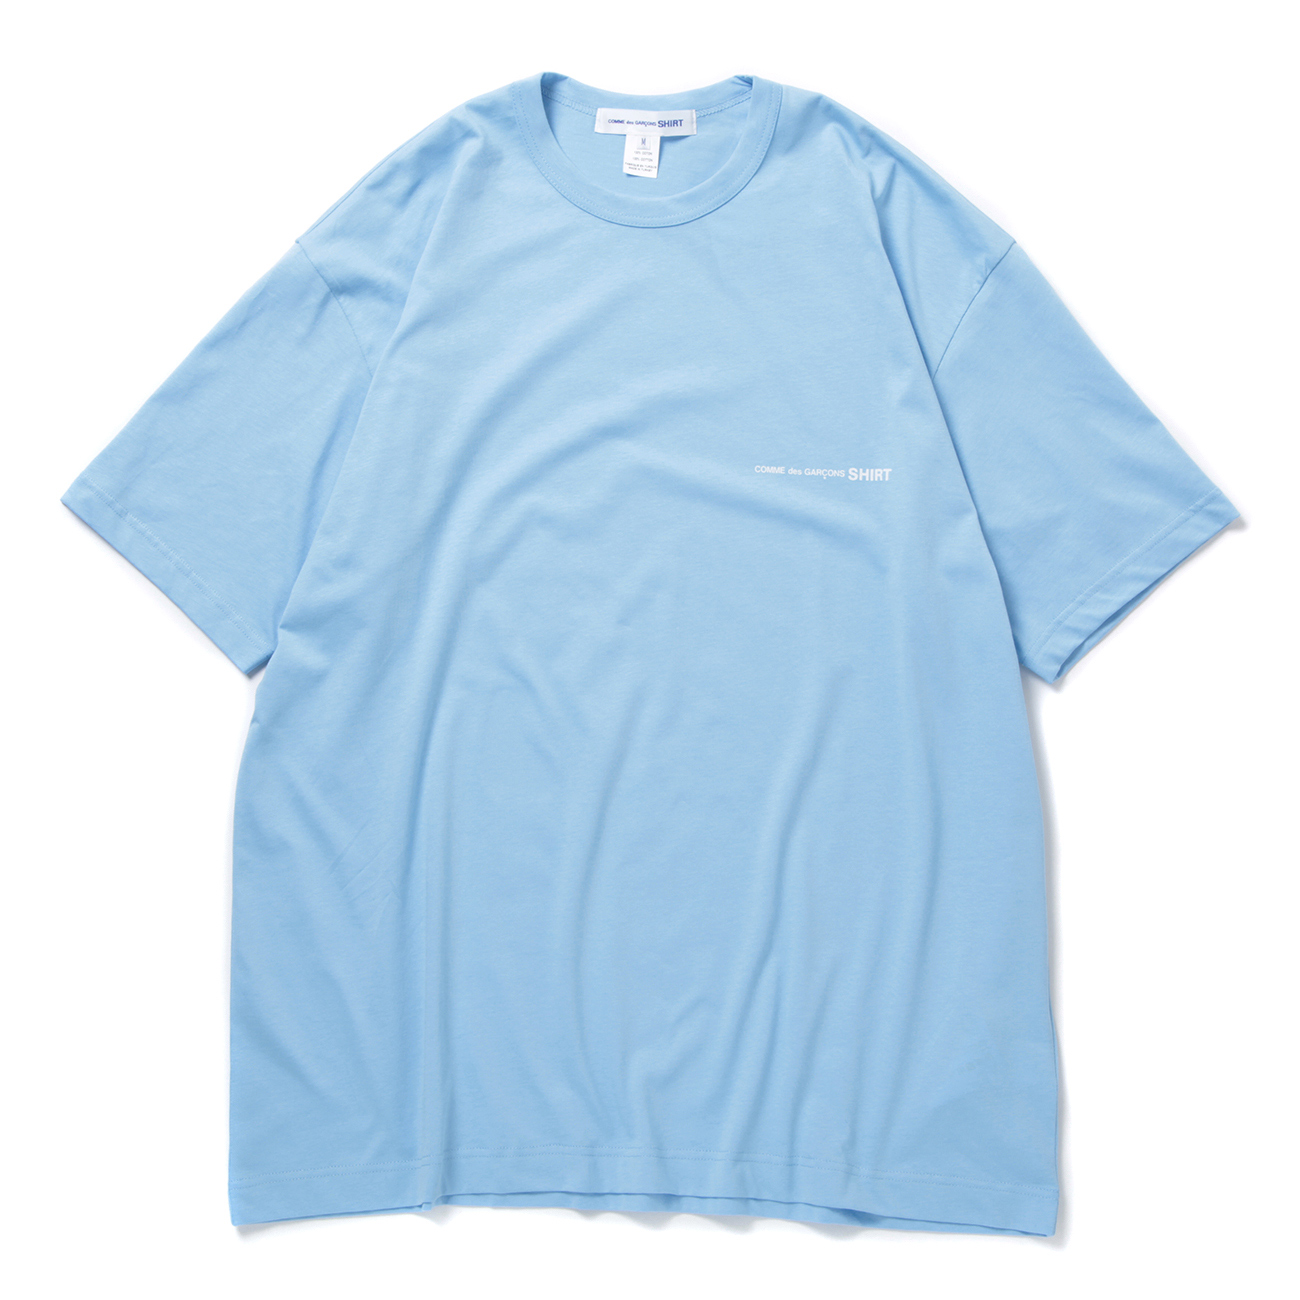 cotton jersey plain with printed CDG SHIRT logo on chest - Blue